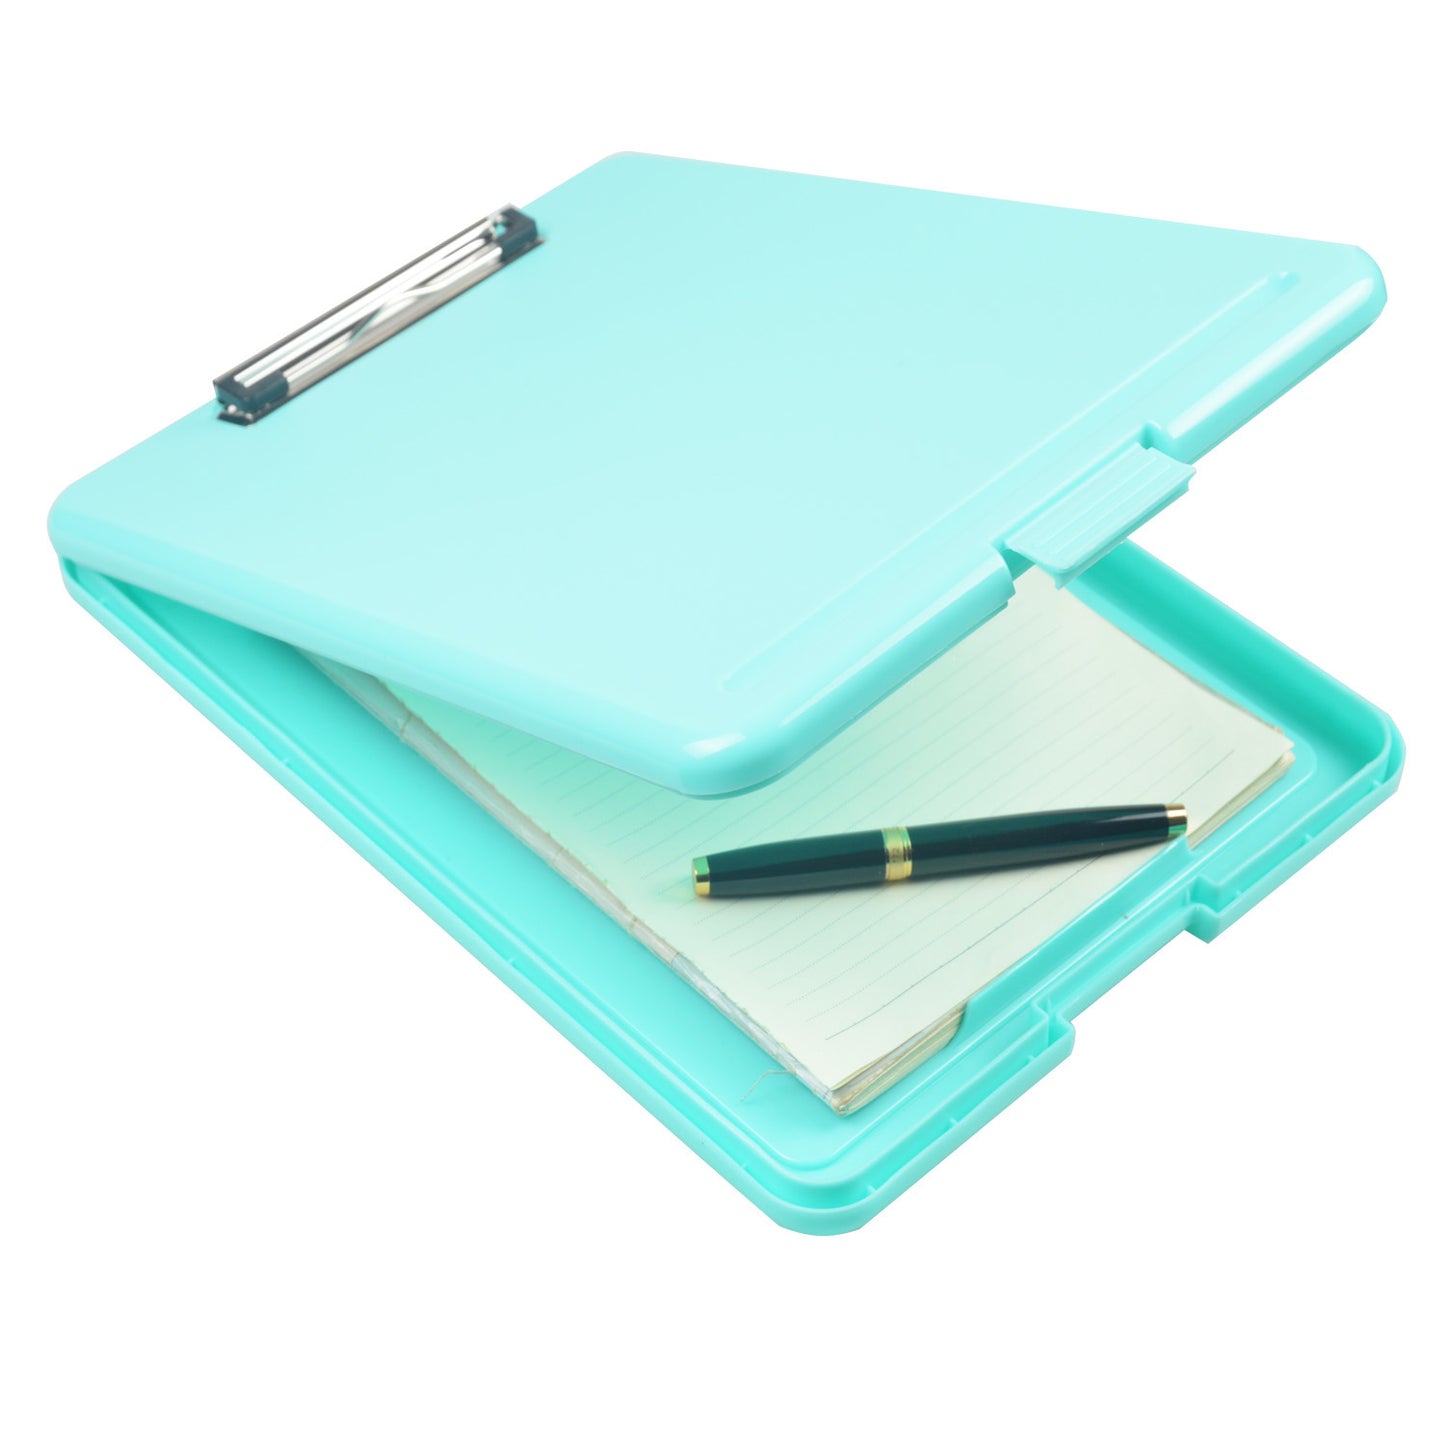 Plastic Storage Foldable Covered Clipboard